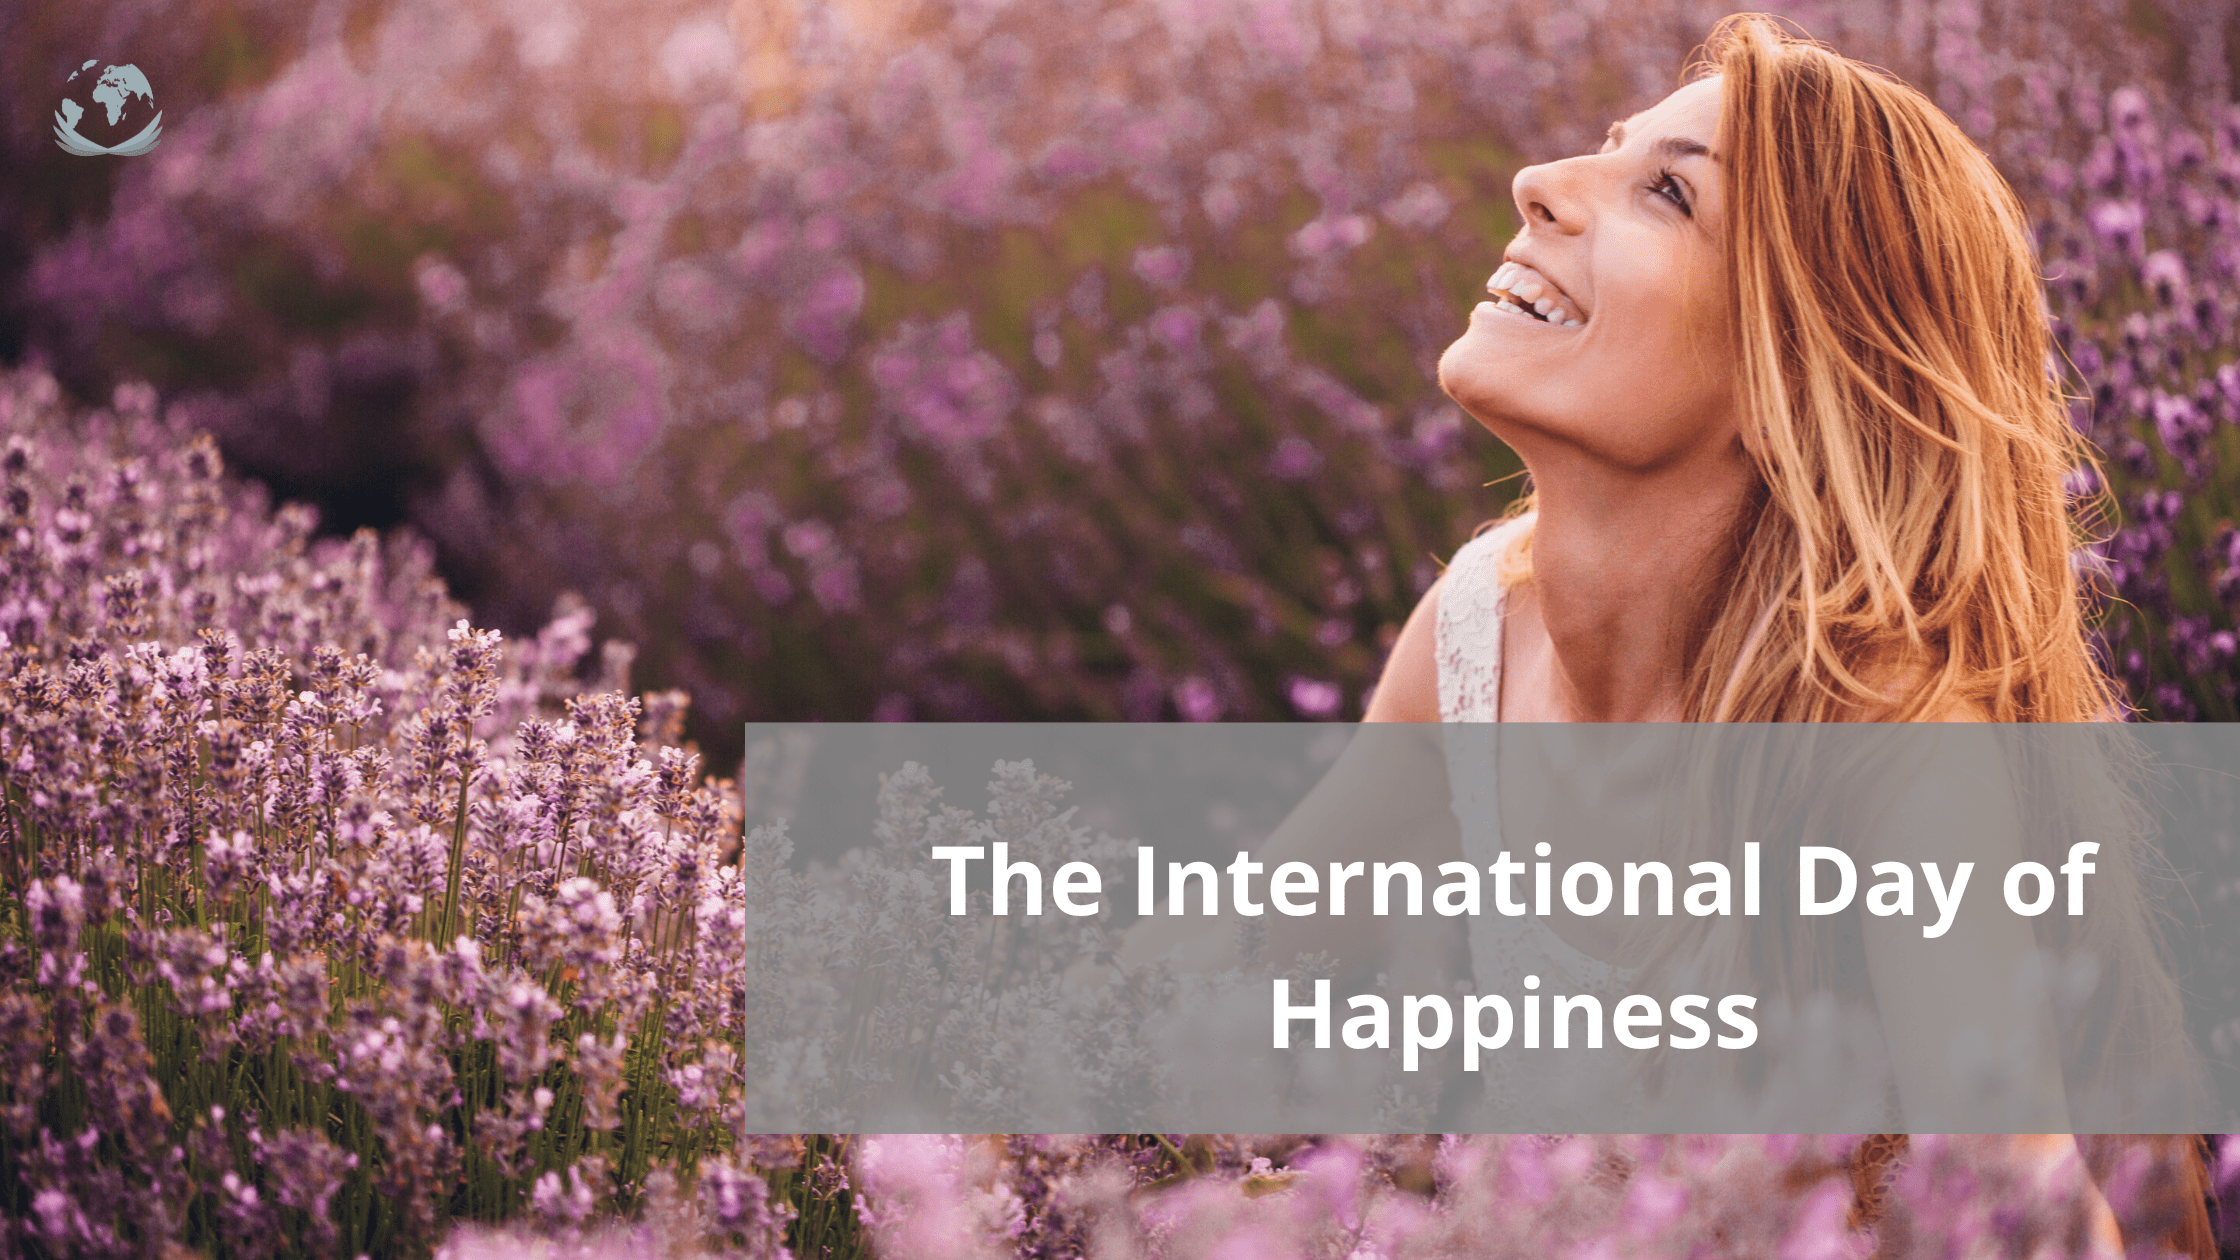 The pursuit of happiness is a fundamental human goal as defined by the United Nations